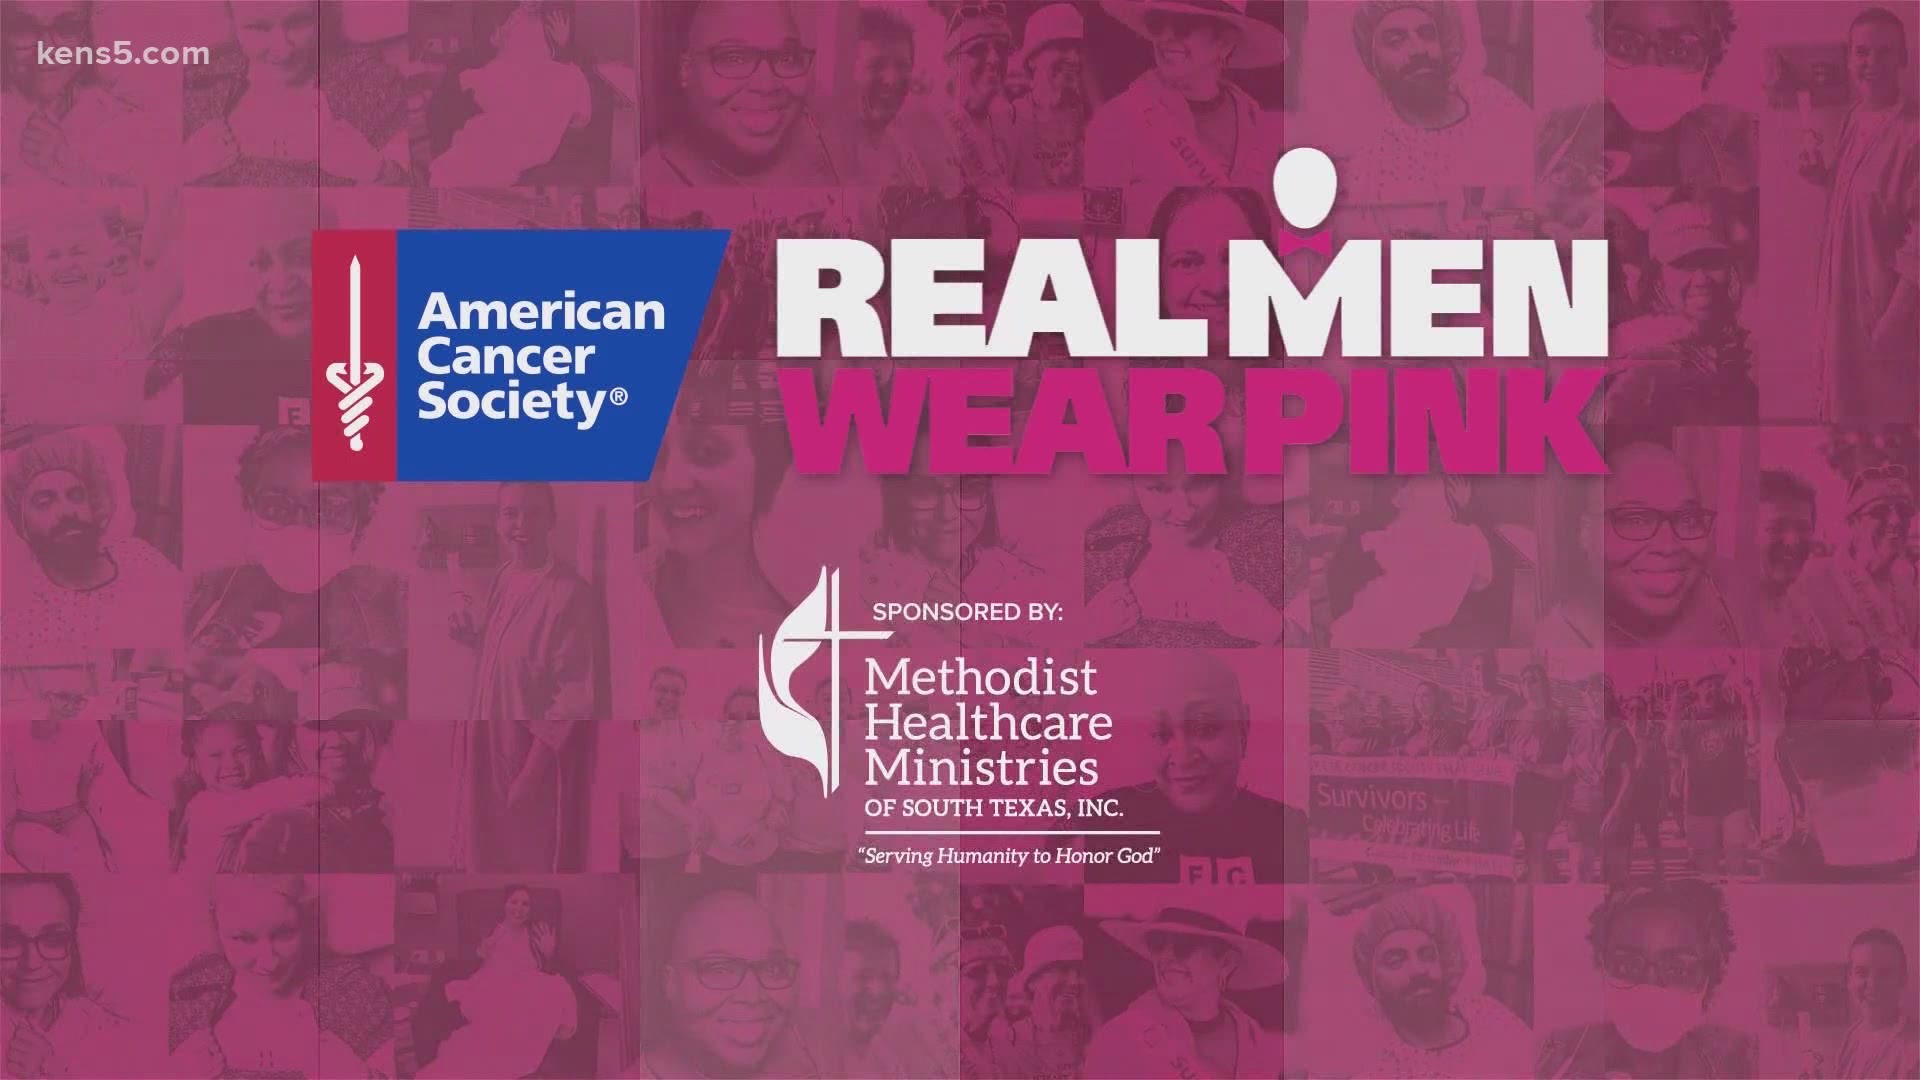 October is Breast Cancer Awareness month, and the American Cancer Society has launched the Real Men Wear Pink campaign.